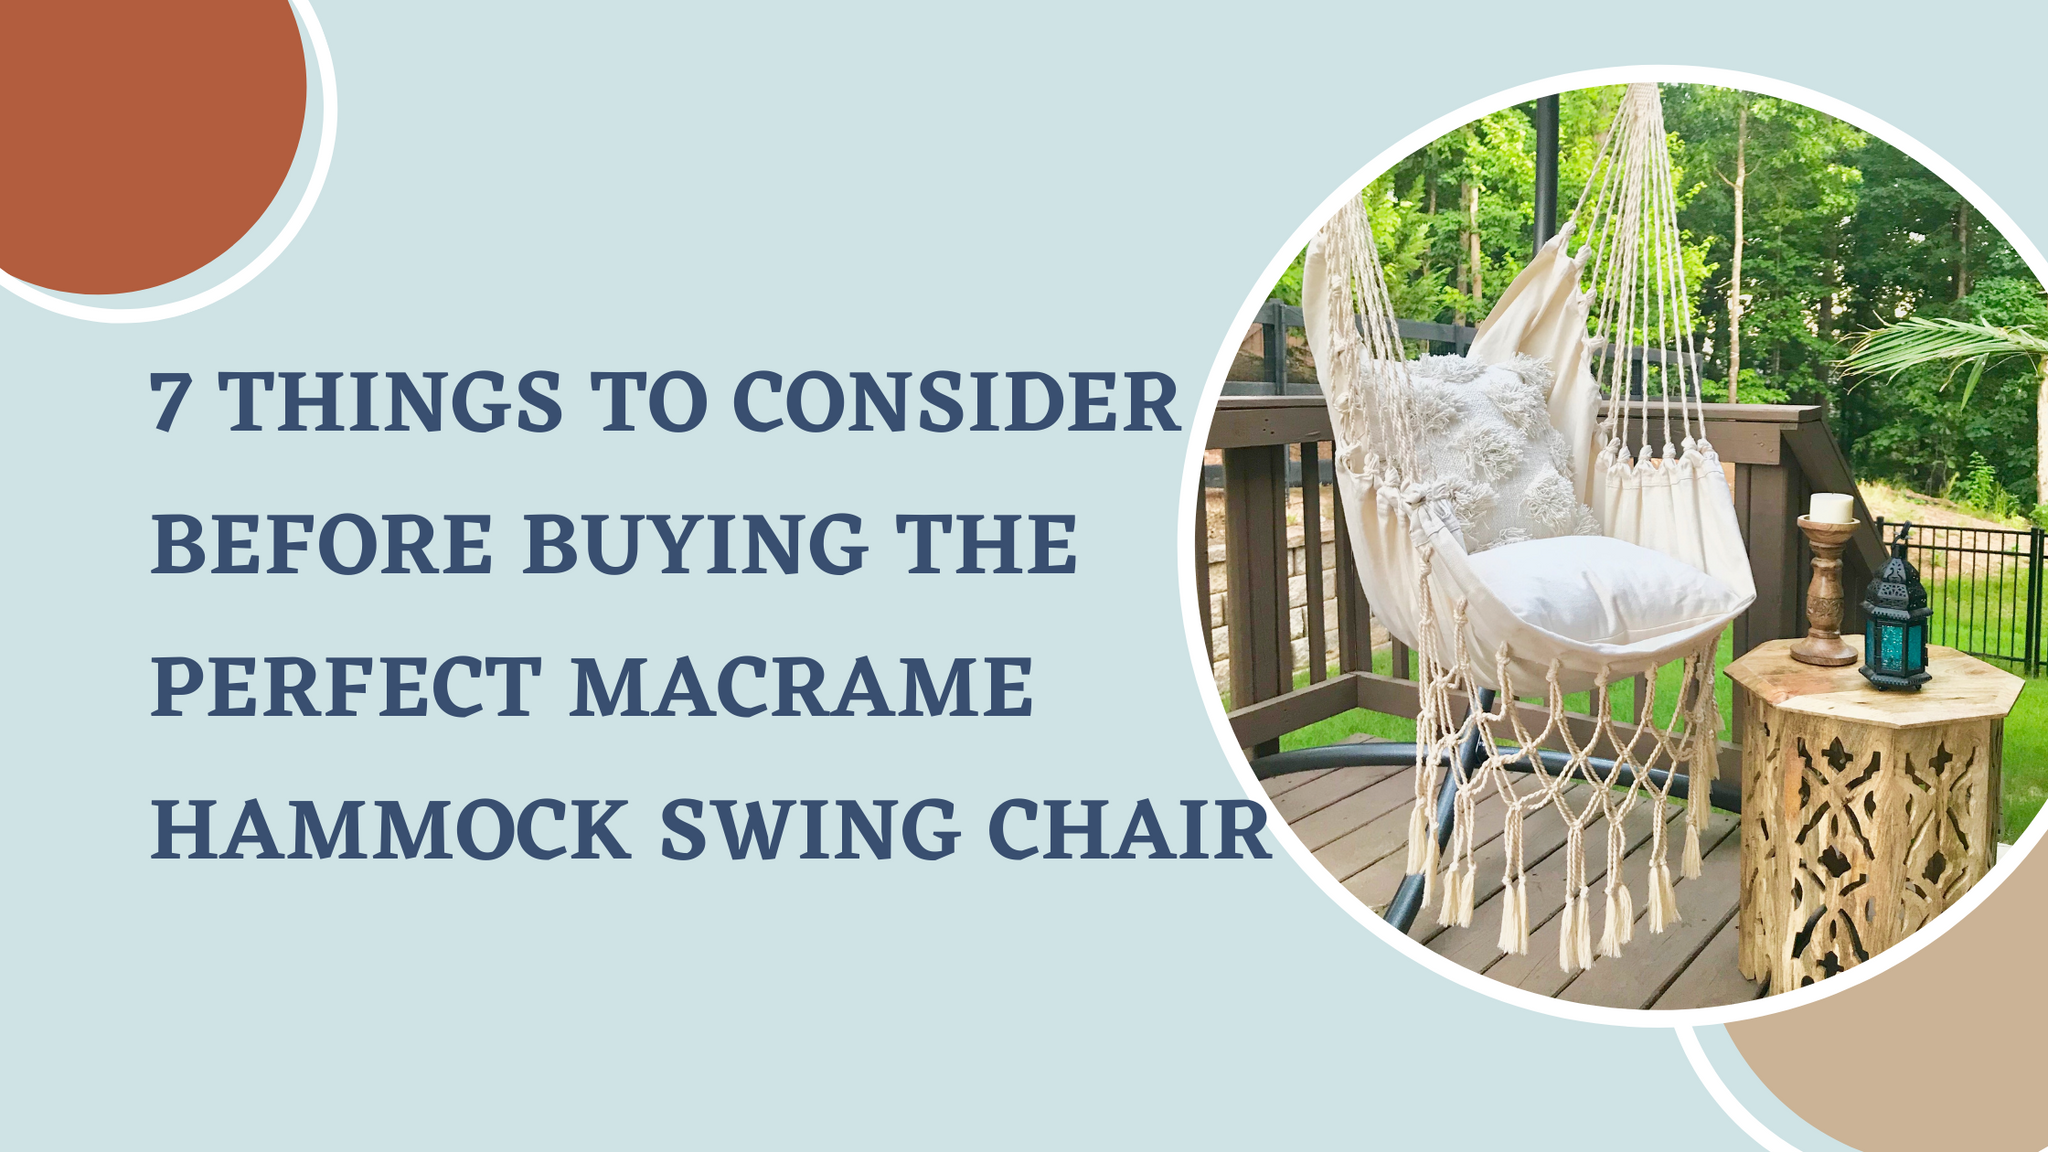 7 THINGS TO CONSIDER BEFORE BUYING A MACRAME HAMMOCK SWING CHAIR